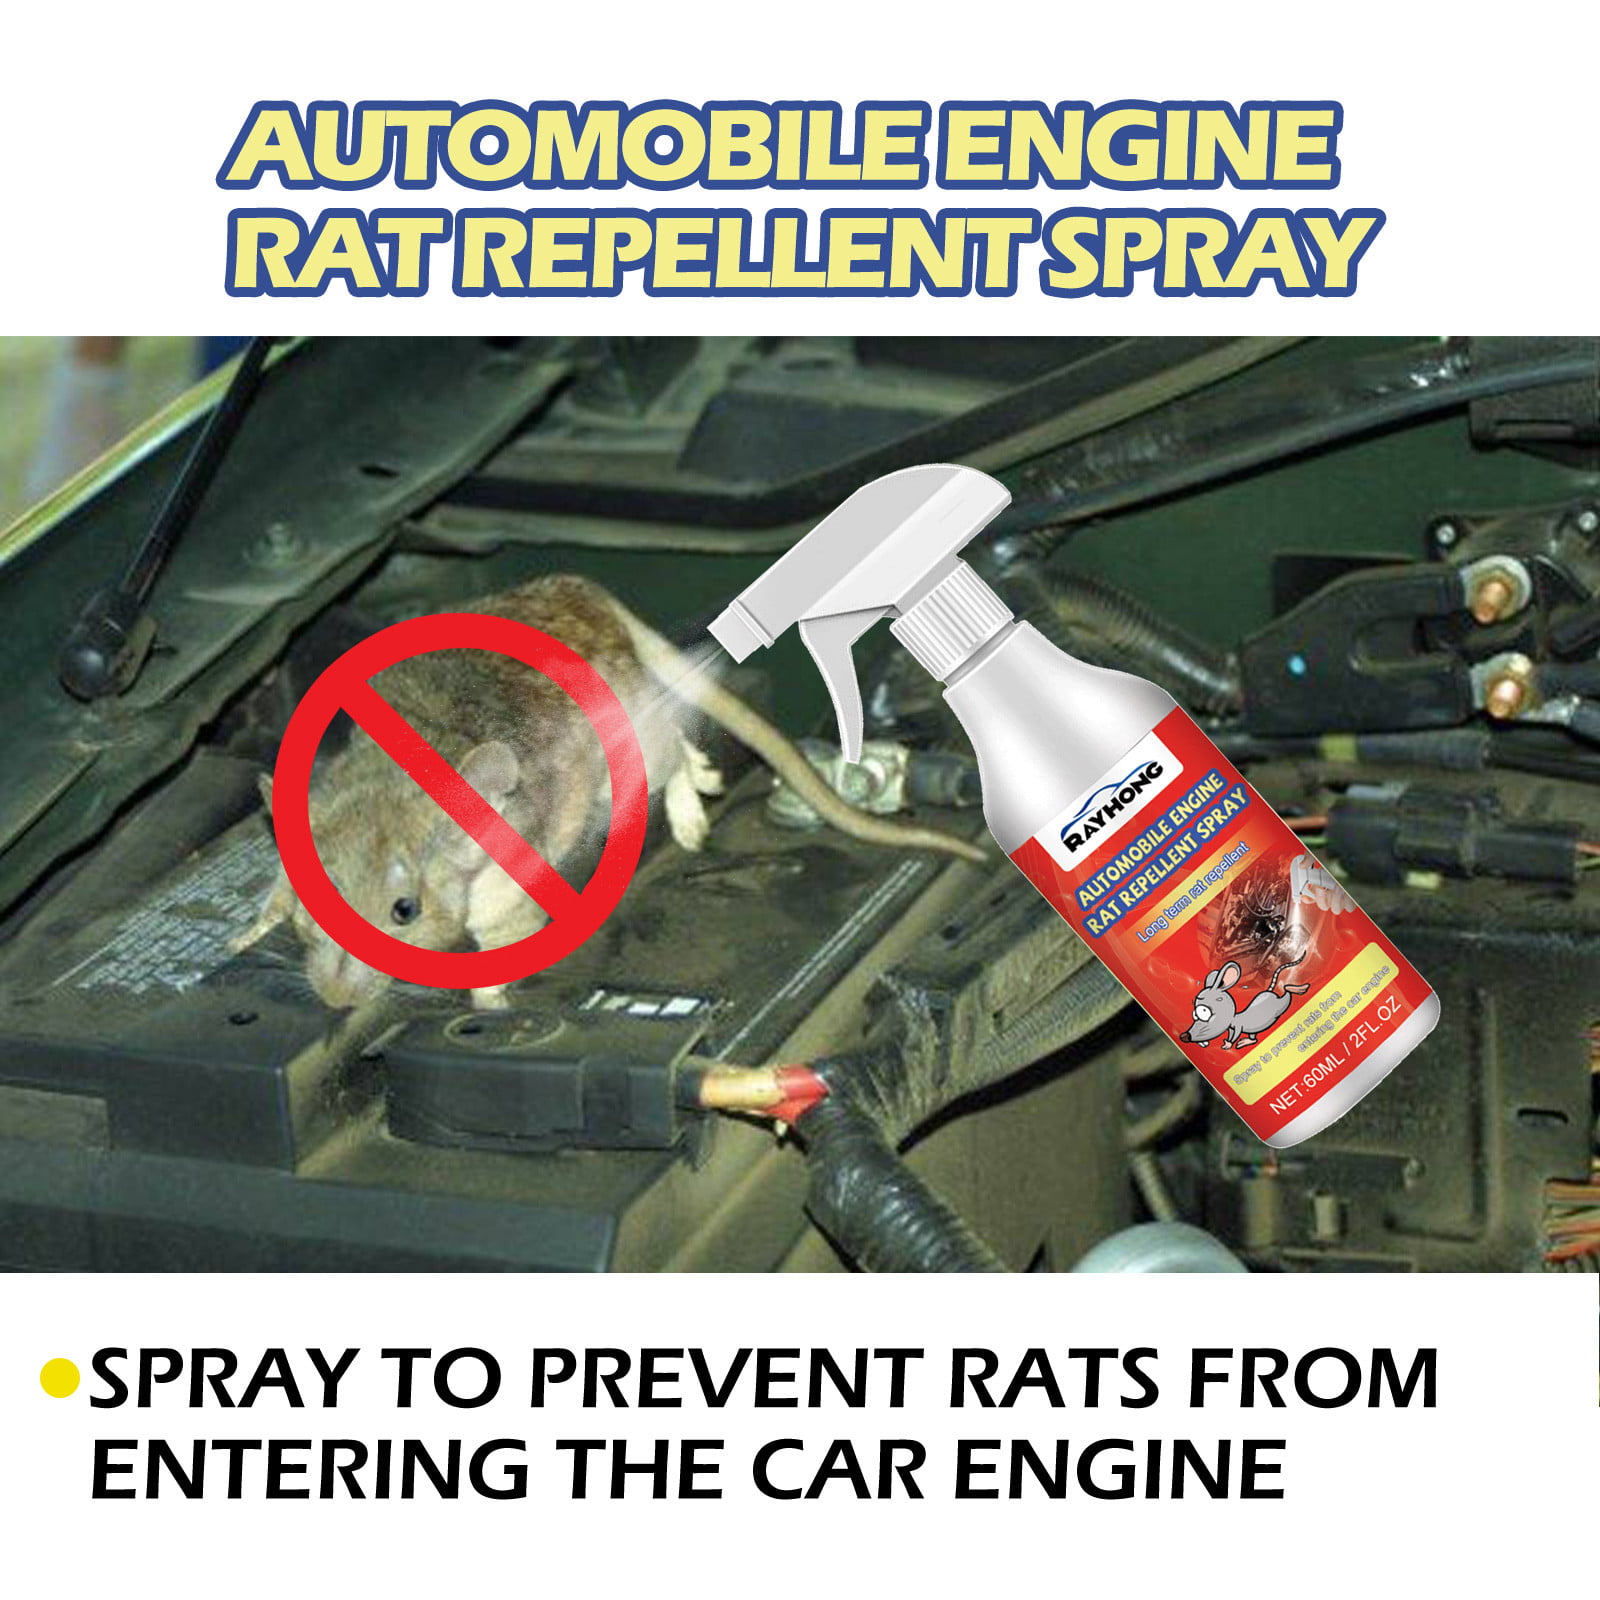 DTBPRQ Rodent Defense Spray for Cars and Trucks - Non-Toxic